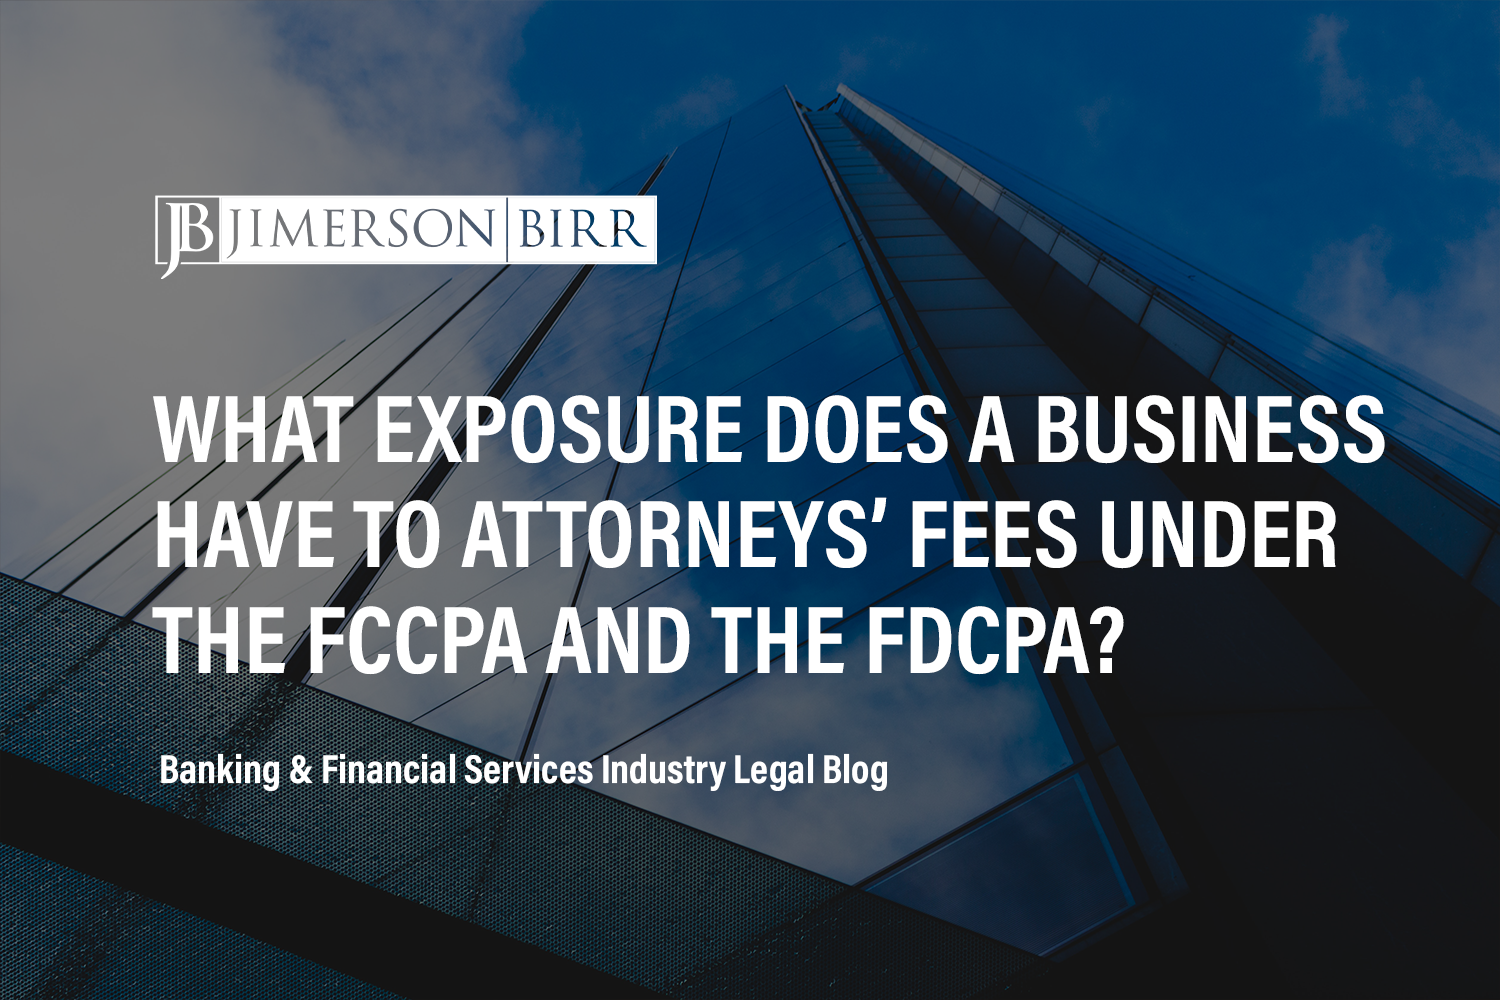 What Exposure Does a Business Have to Attorneys’ Fees Under the FCCPA and the FDCPA?